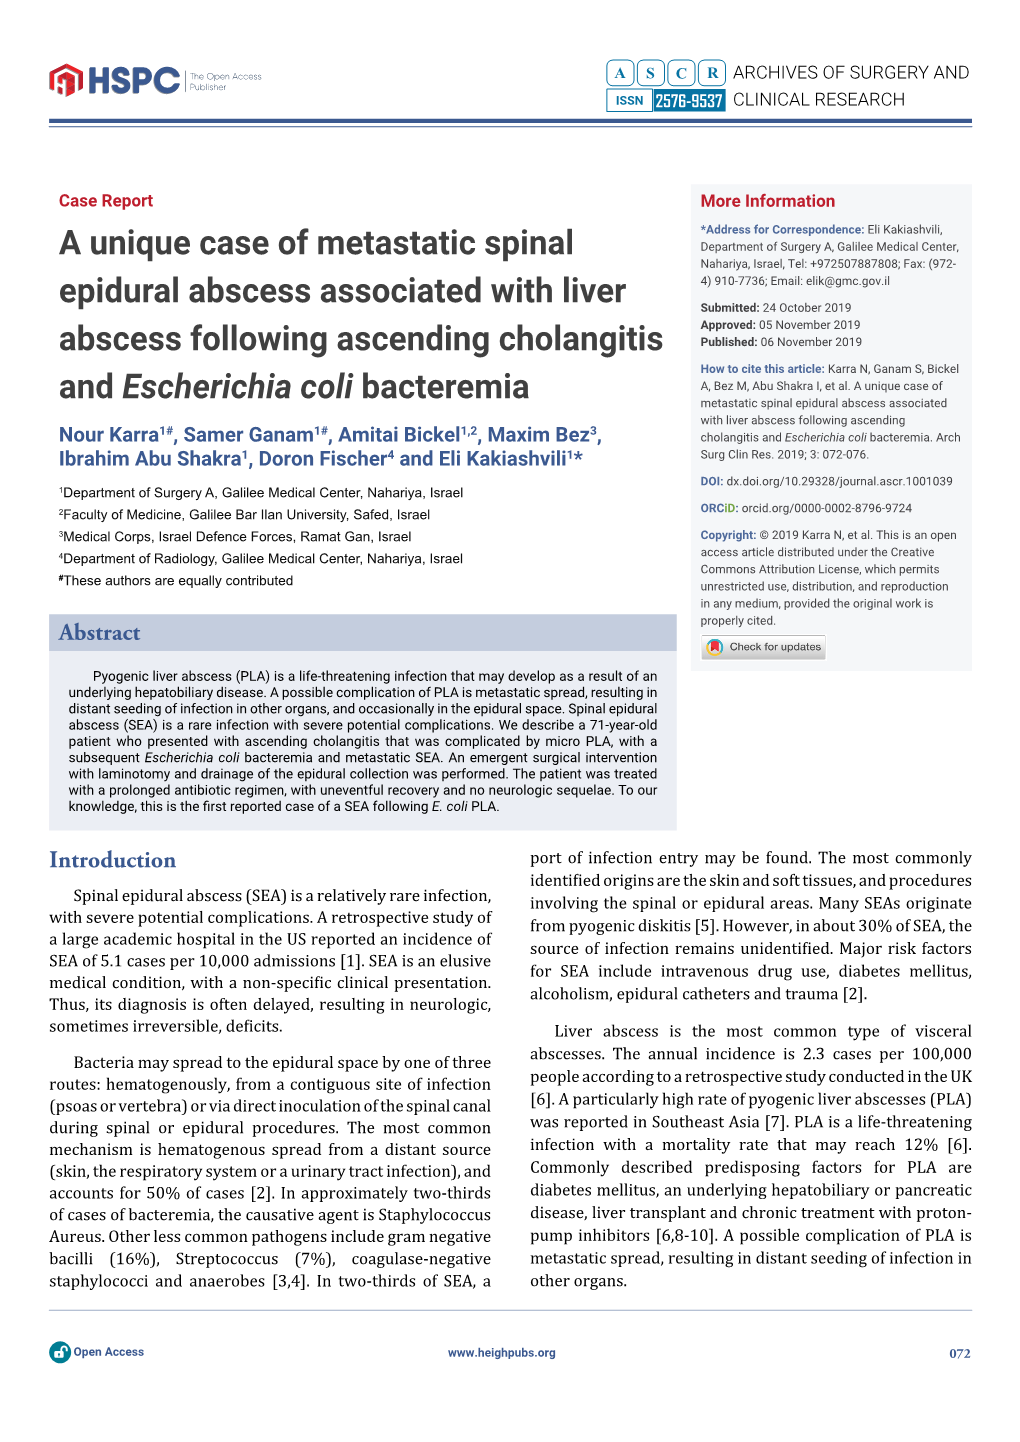 A Unique Case of Metastatic Spinal Epidural Abscess Associated with Liver Abscess Following Ascending Cholangitis and Escherichia Coli Bacteremia